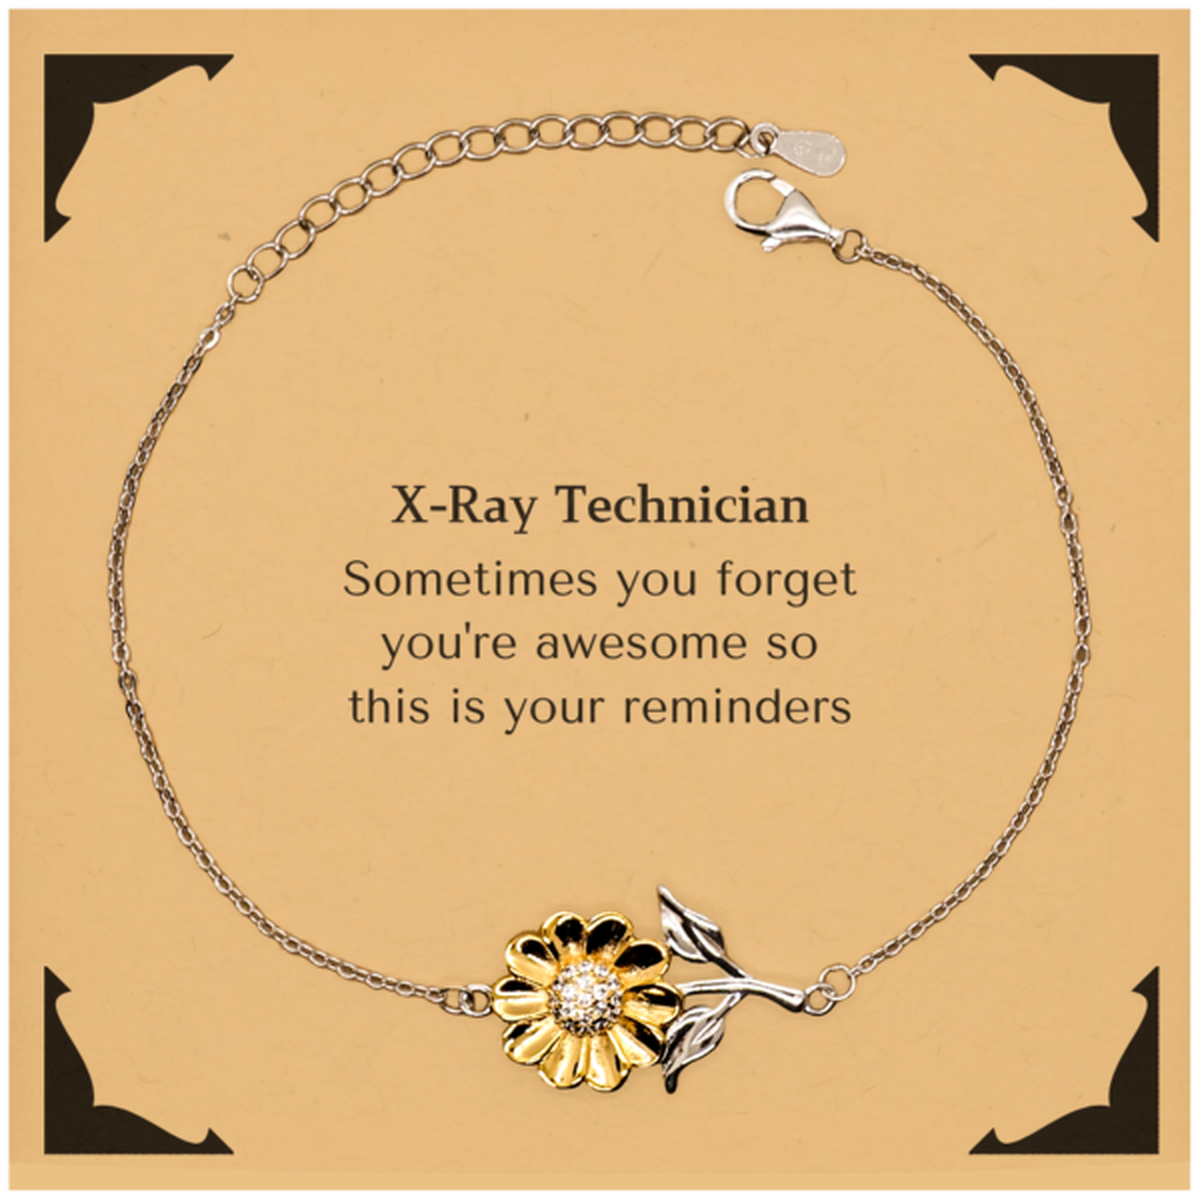 Sentimental X-Ray Technician Sunflower Bracelet, X-Ray Technician Sometimes you forget you're awesome so this is your reminders, Graduation Christmas Birthday Gifts for X-Ray Technician, Men, Women, Coworkers